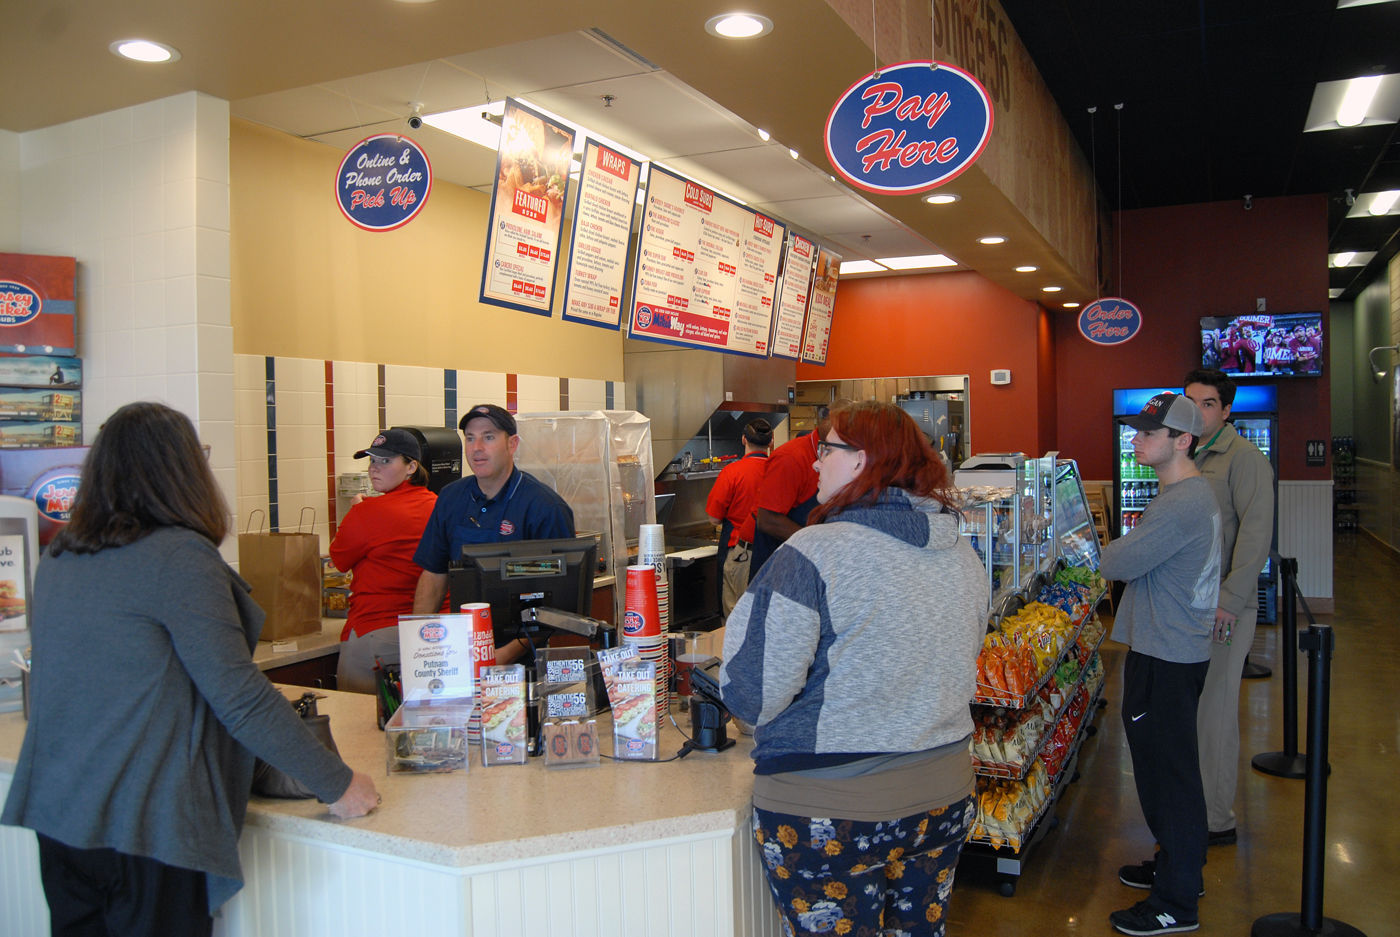 jersey mike's sub shops